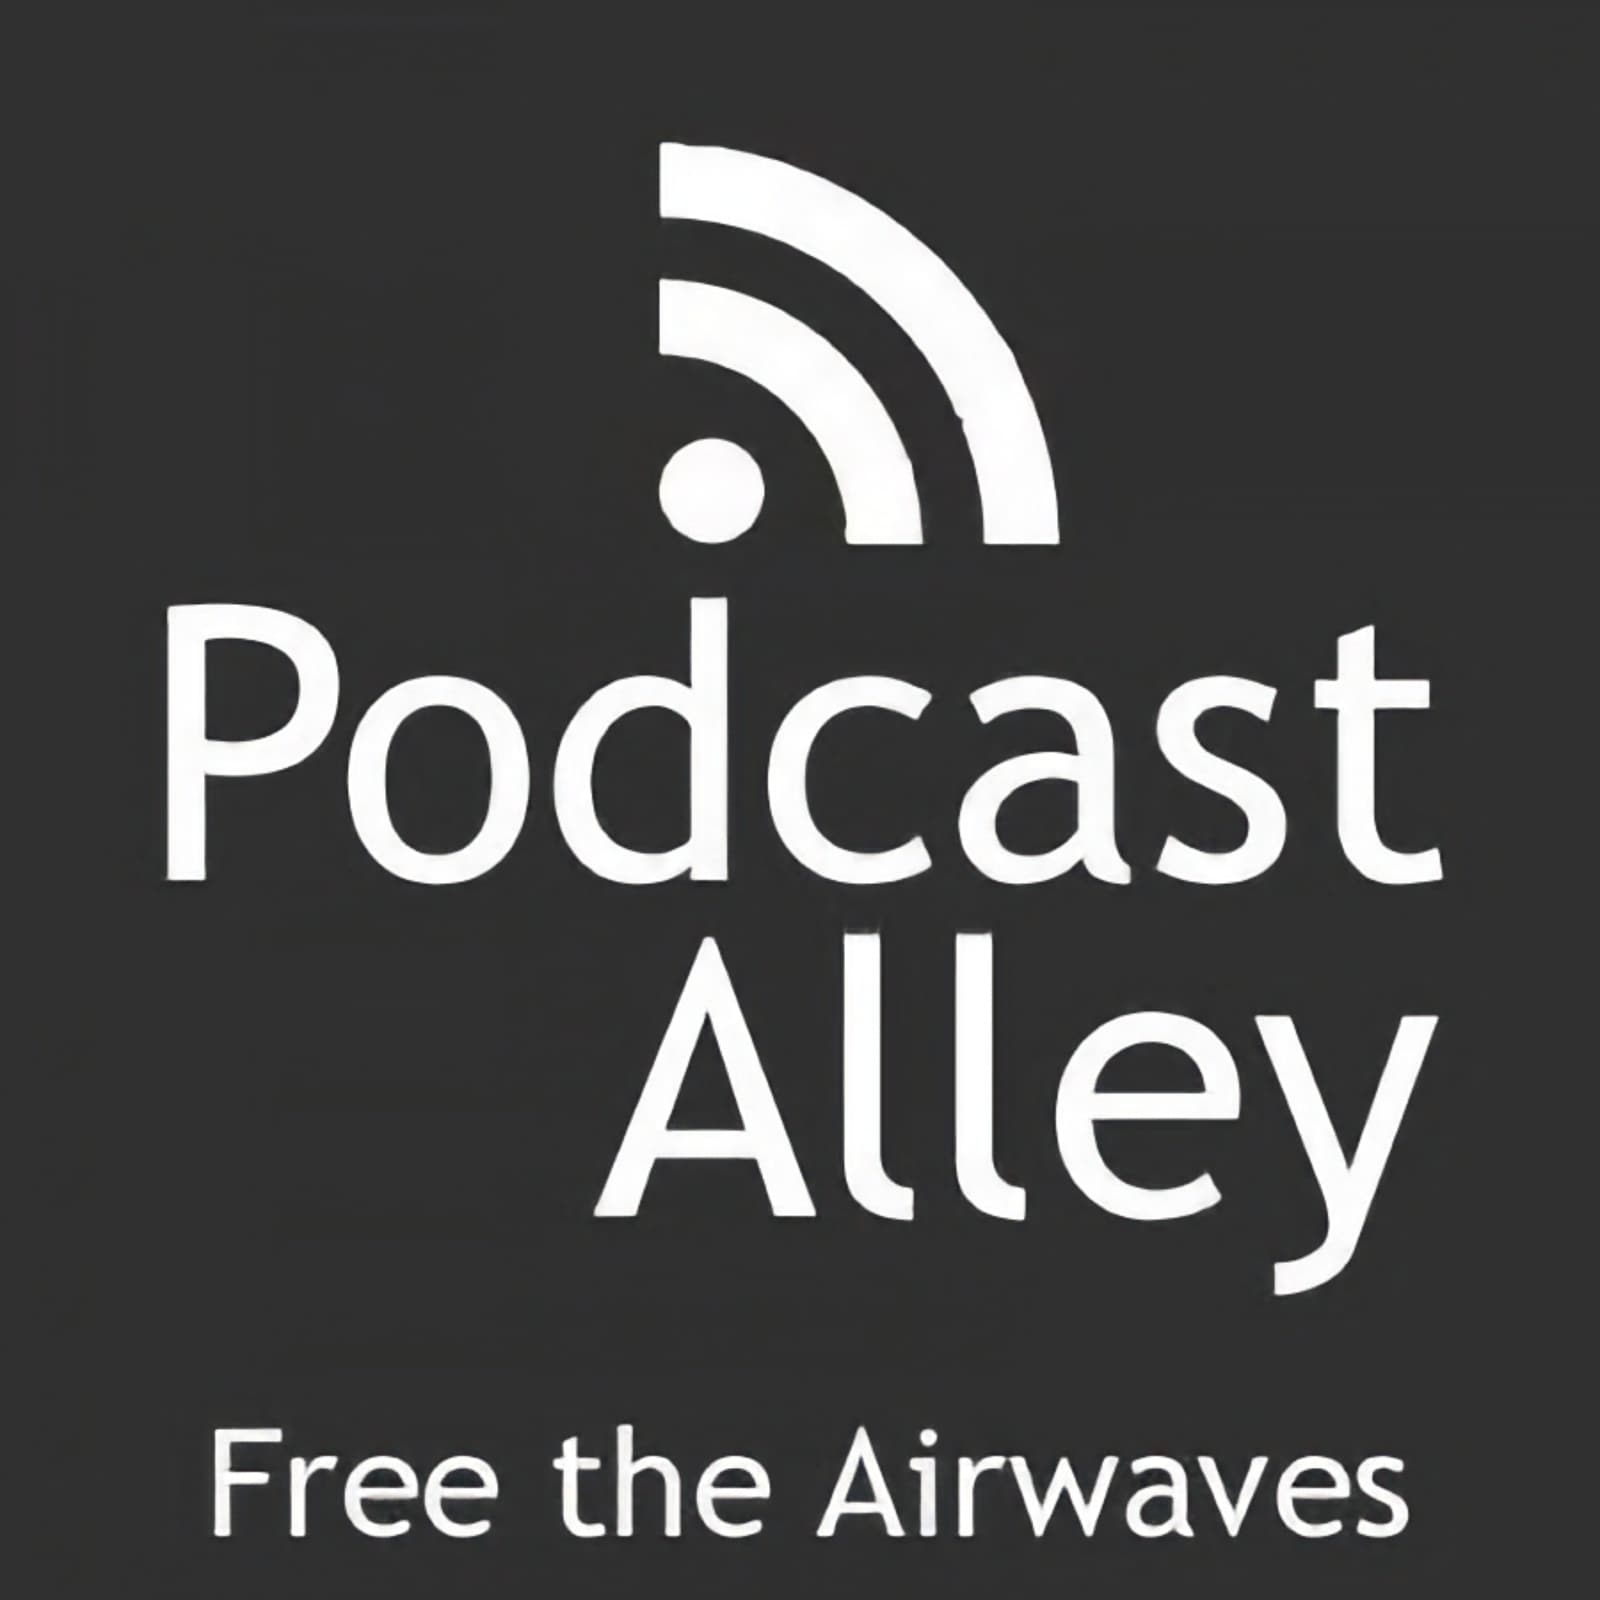 Podcast Alley logo Free The Airwaves but then Podshow Nuked You So That Went Well...